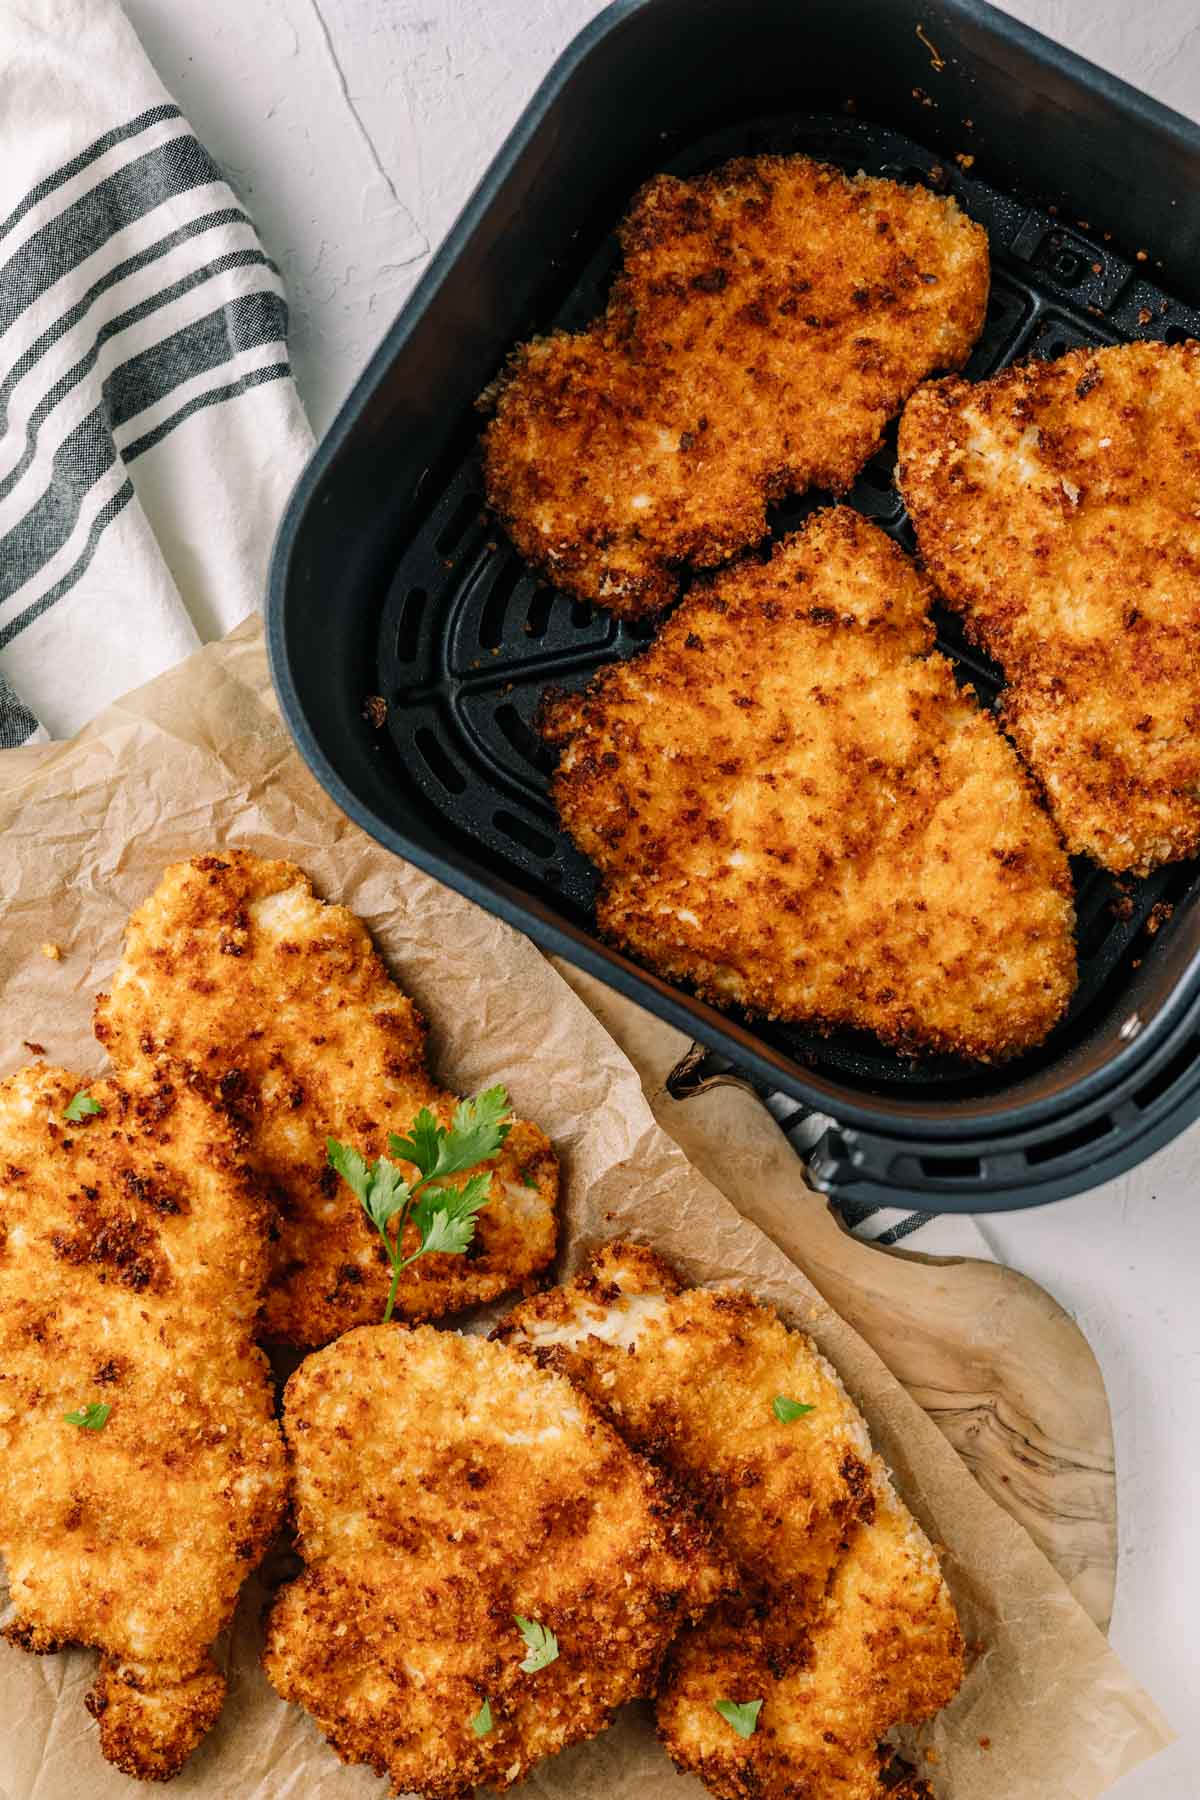 Top-down image crispy, golden chicken cutlets in air fryer basket with some on the table next to it